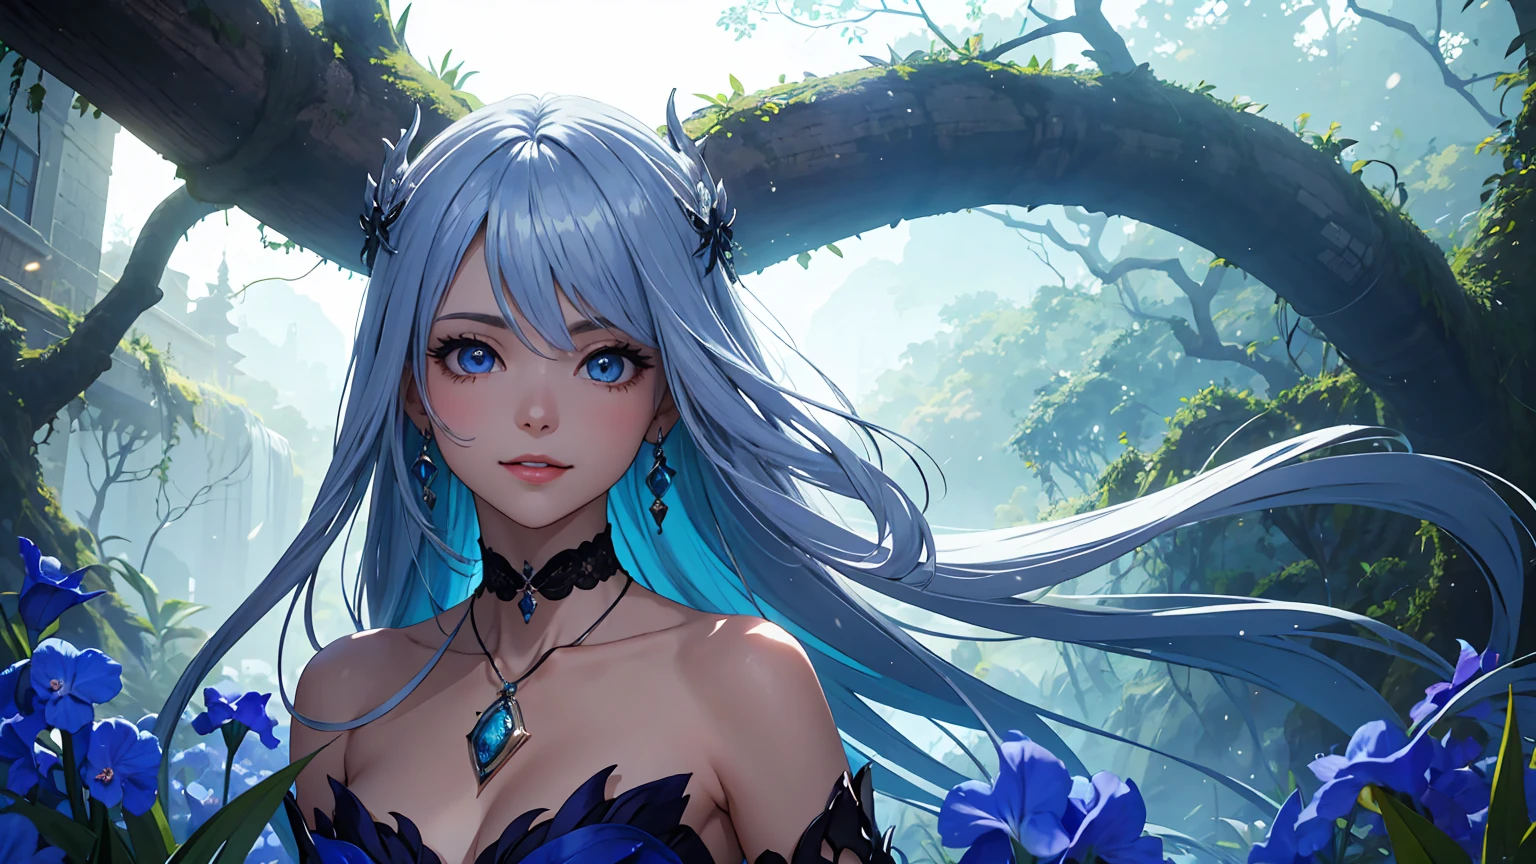 Arte de anime Genshin Impact: Woman in a setting with a giant tree in the background and starry sky, full of sparkling celestial bodies, evoking another world. romantic era. Deep and dramatic atmosphere, mixing fantasy and reality. She is adorned with necklace and choker. clear and sharp eyes: irises with vibrant and detailed colors, well-defined pupils, natural shine reflecting light, clear and distinct iris edges, long, well-shaped eyelashes, well-groomed eyebrows, fine lines around the eyes. flowing hair. Sweet and provocative look, charmer smile. playful expression, stylish make up, long blonde hair flowing in the wind, Eyes seductive, Glossy lips, pose sexy, smiling confidently and seductively. Bold and determined stance, dynamic pose, directly facing the viewer. posing for a professional photo shoot. very high quality image, with ultra-detailed and realistic details. Vibrant colors and ethereal lighting. imaginative landscapes, expansive horizon, dramatic lighting. bright and vibrant colors, studio lighting, shallow depth of field, highlighting the main topic, soft natural lighting, Creating a dreamlike and magical atmosphere. Nature beauty.